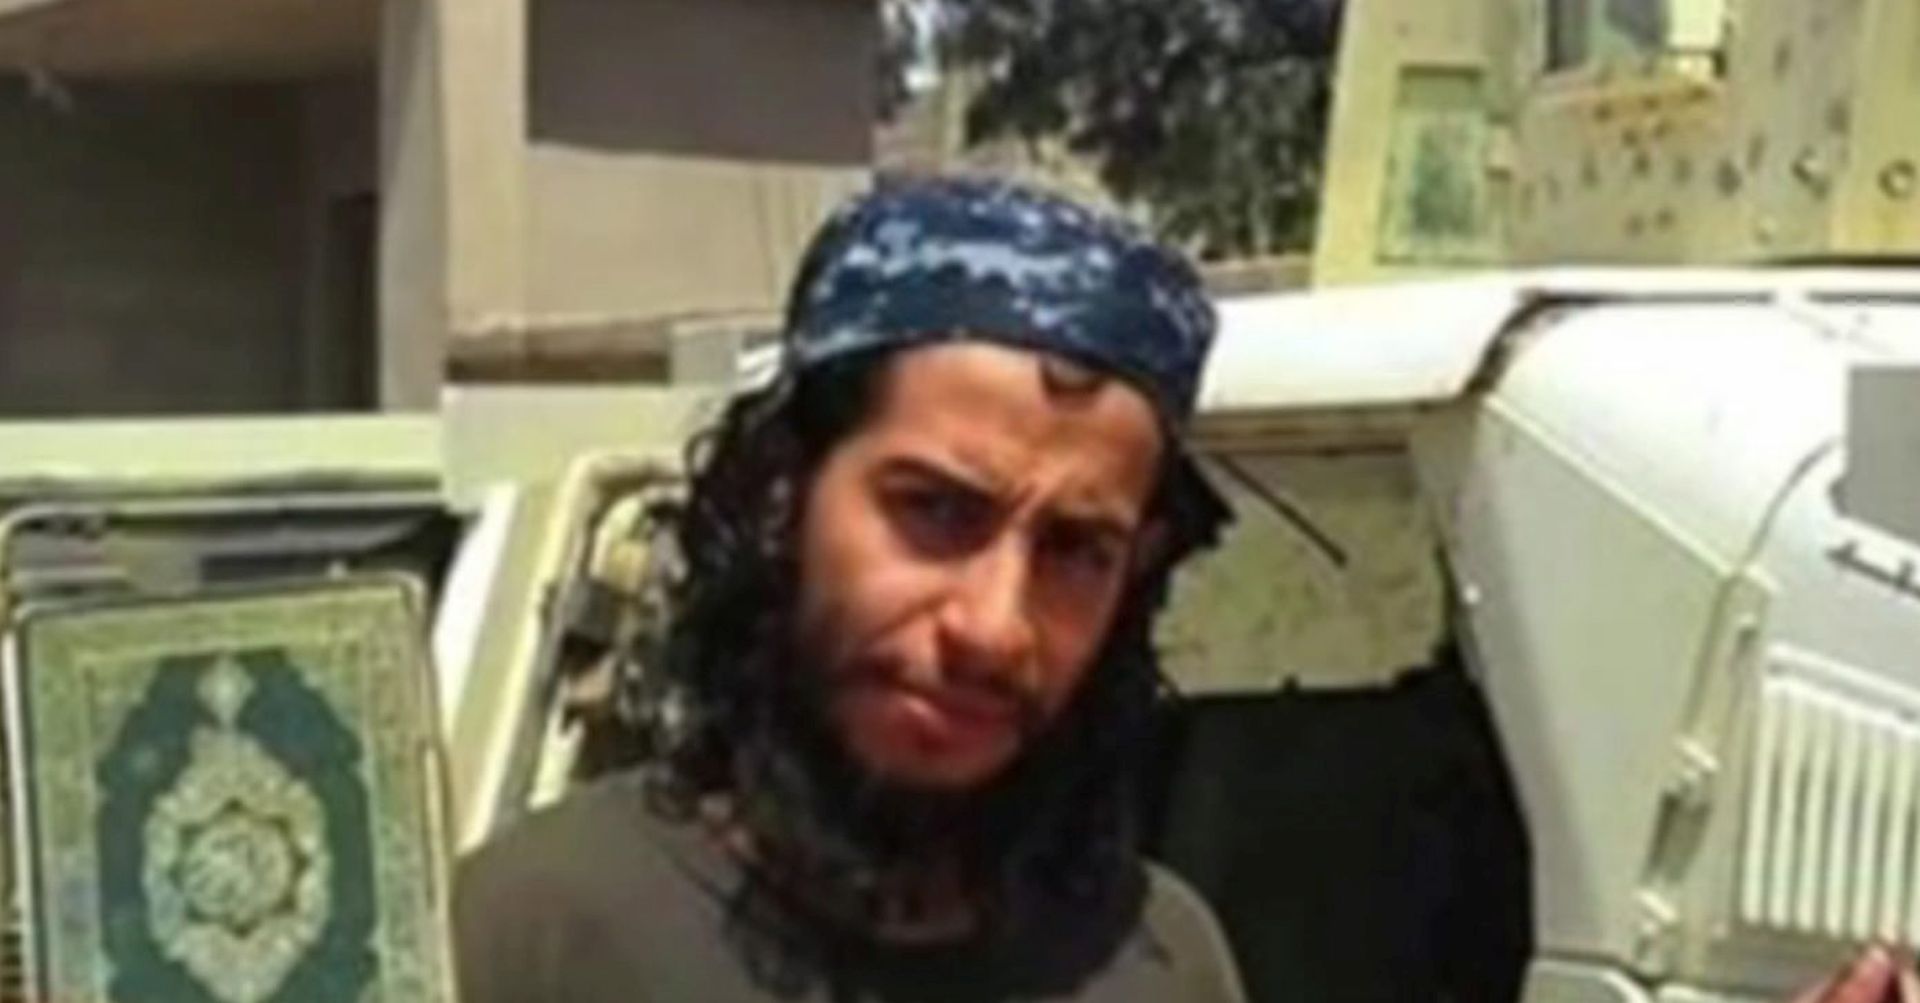 epa05032536 A framegrab made from an undated video released by the jihadist group calling itself Islamic State (IS) allegedly showing Abdelhamid Abaaoud posing with a Koran and the ISIS flag at an undisclosed location. According to French officials, Belgian-born Abdelhamid Abaaoud was identified as among those killed in the police raids in Saint Denis November 18.  EPA/ BEST QUALITY AVAILABLE. ATTENTION EDITORS : EPA IS USING AN IMAGE FROM AN ALTERNATIVE SOURCE AND CANNOT PROVIDE CONFIRMATION OF CONTENT, AUTHENTICITY, PLACE, DATE AND SOURCE. HANDOUT EDITORIAL USE ONLY/NO SALES HANDOUT EDITORIAL USE ONLY/NO SALES